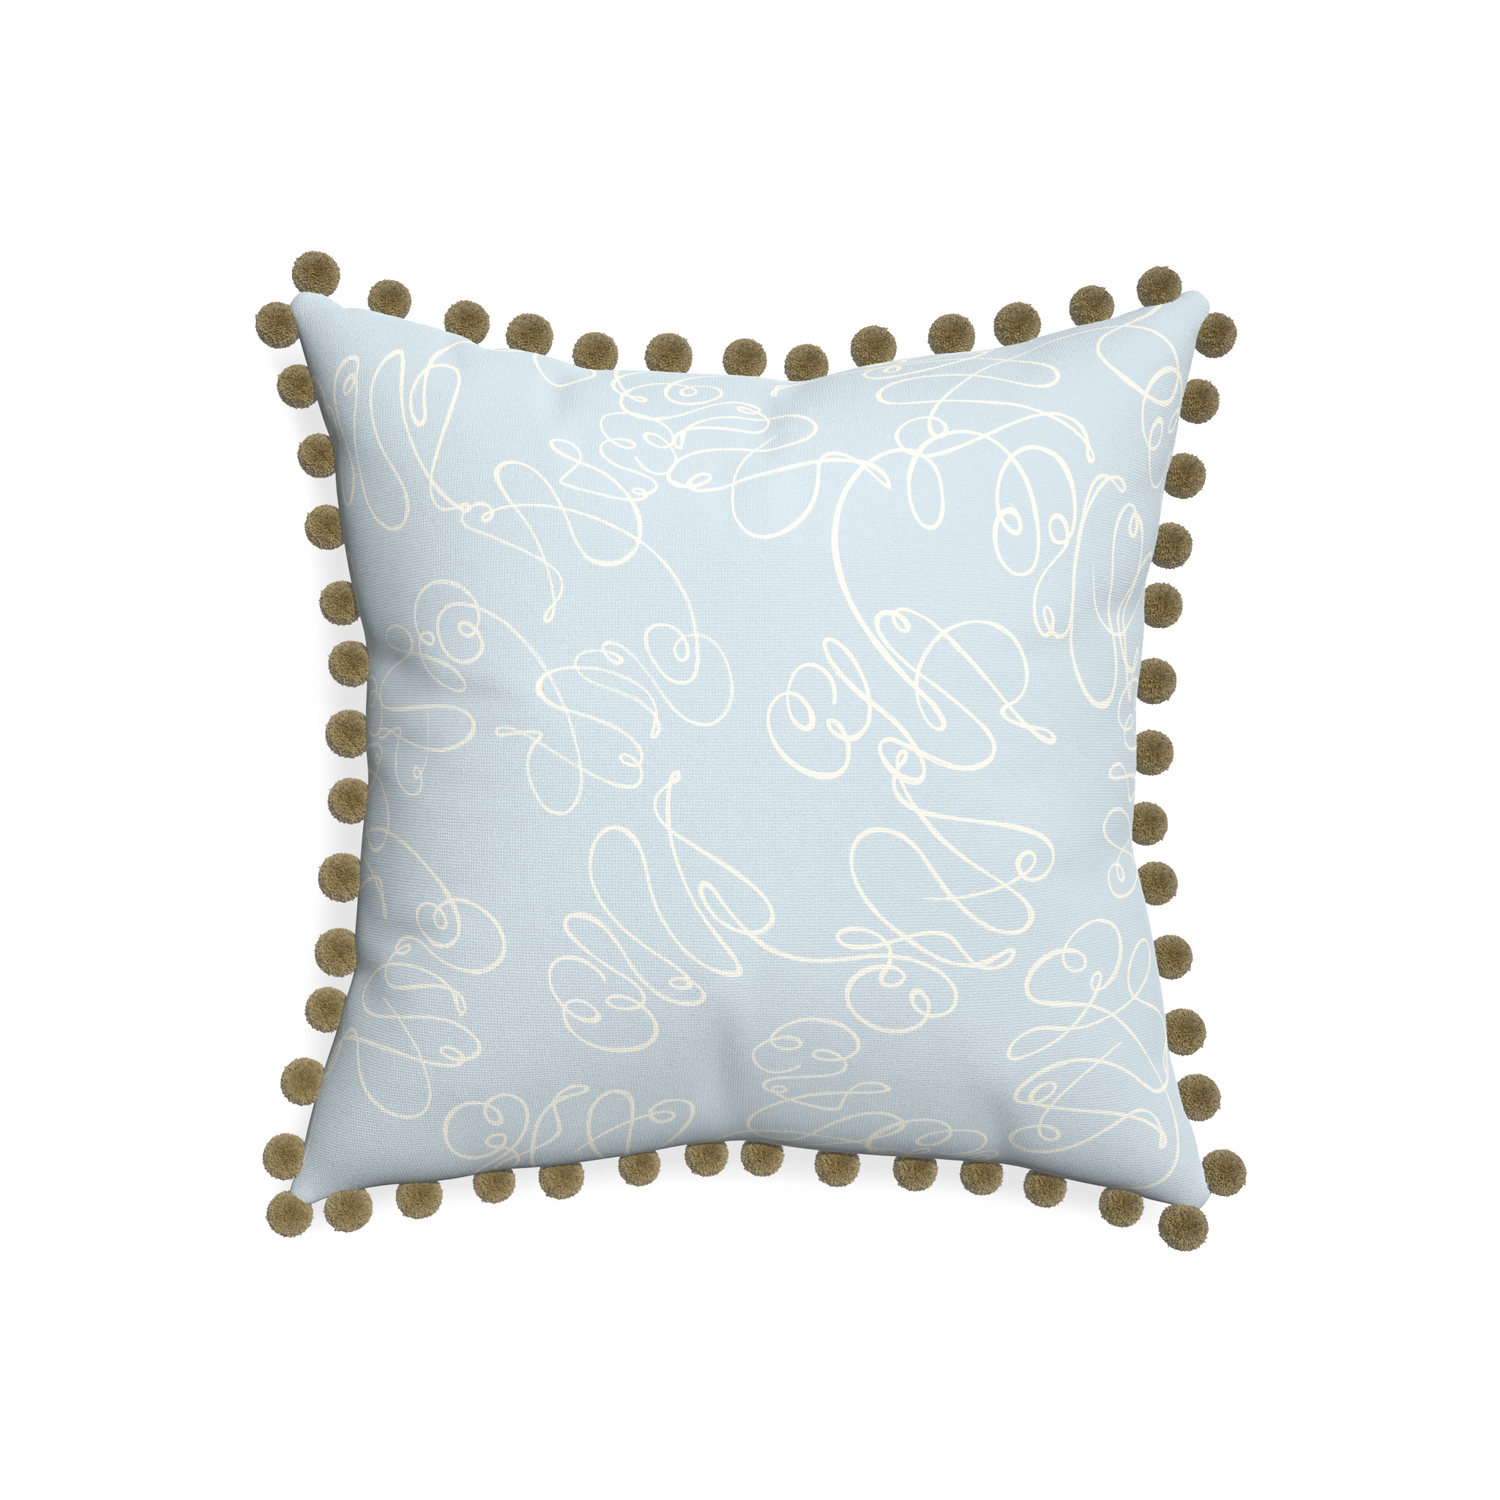 20-square mirabella custom pillow with olive pom pom on white background